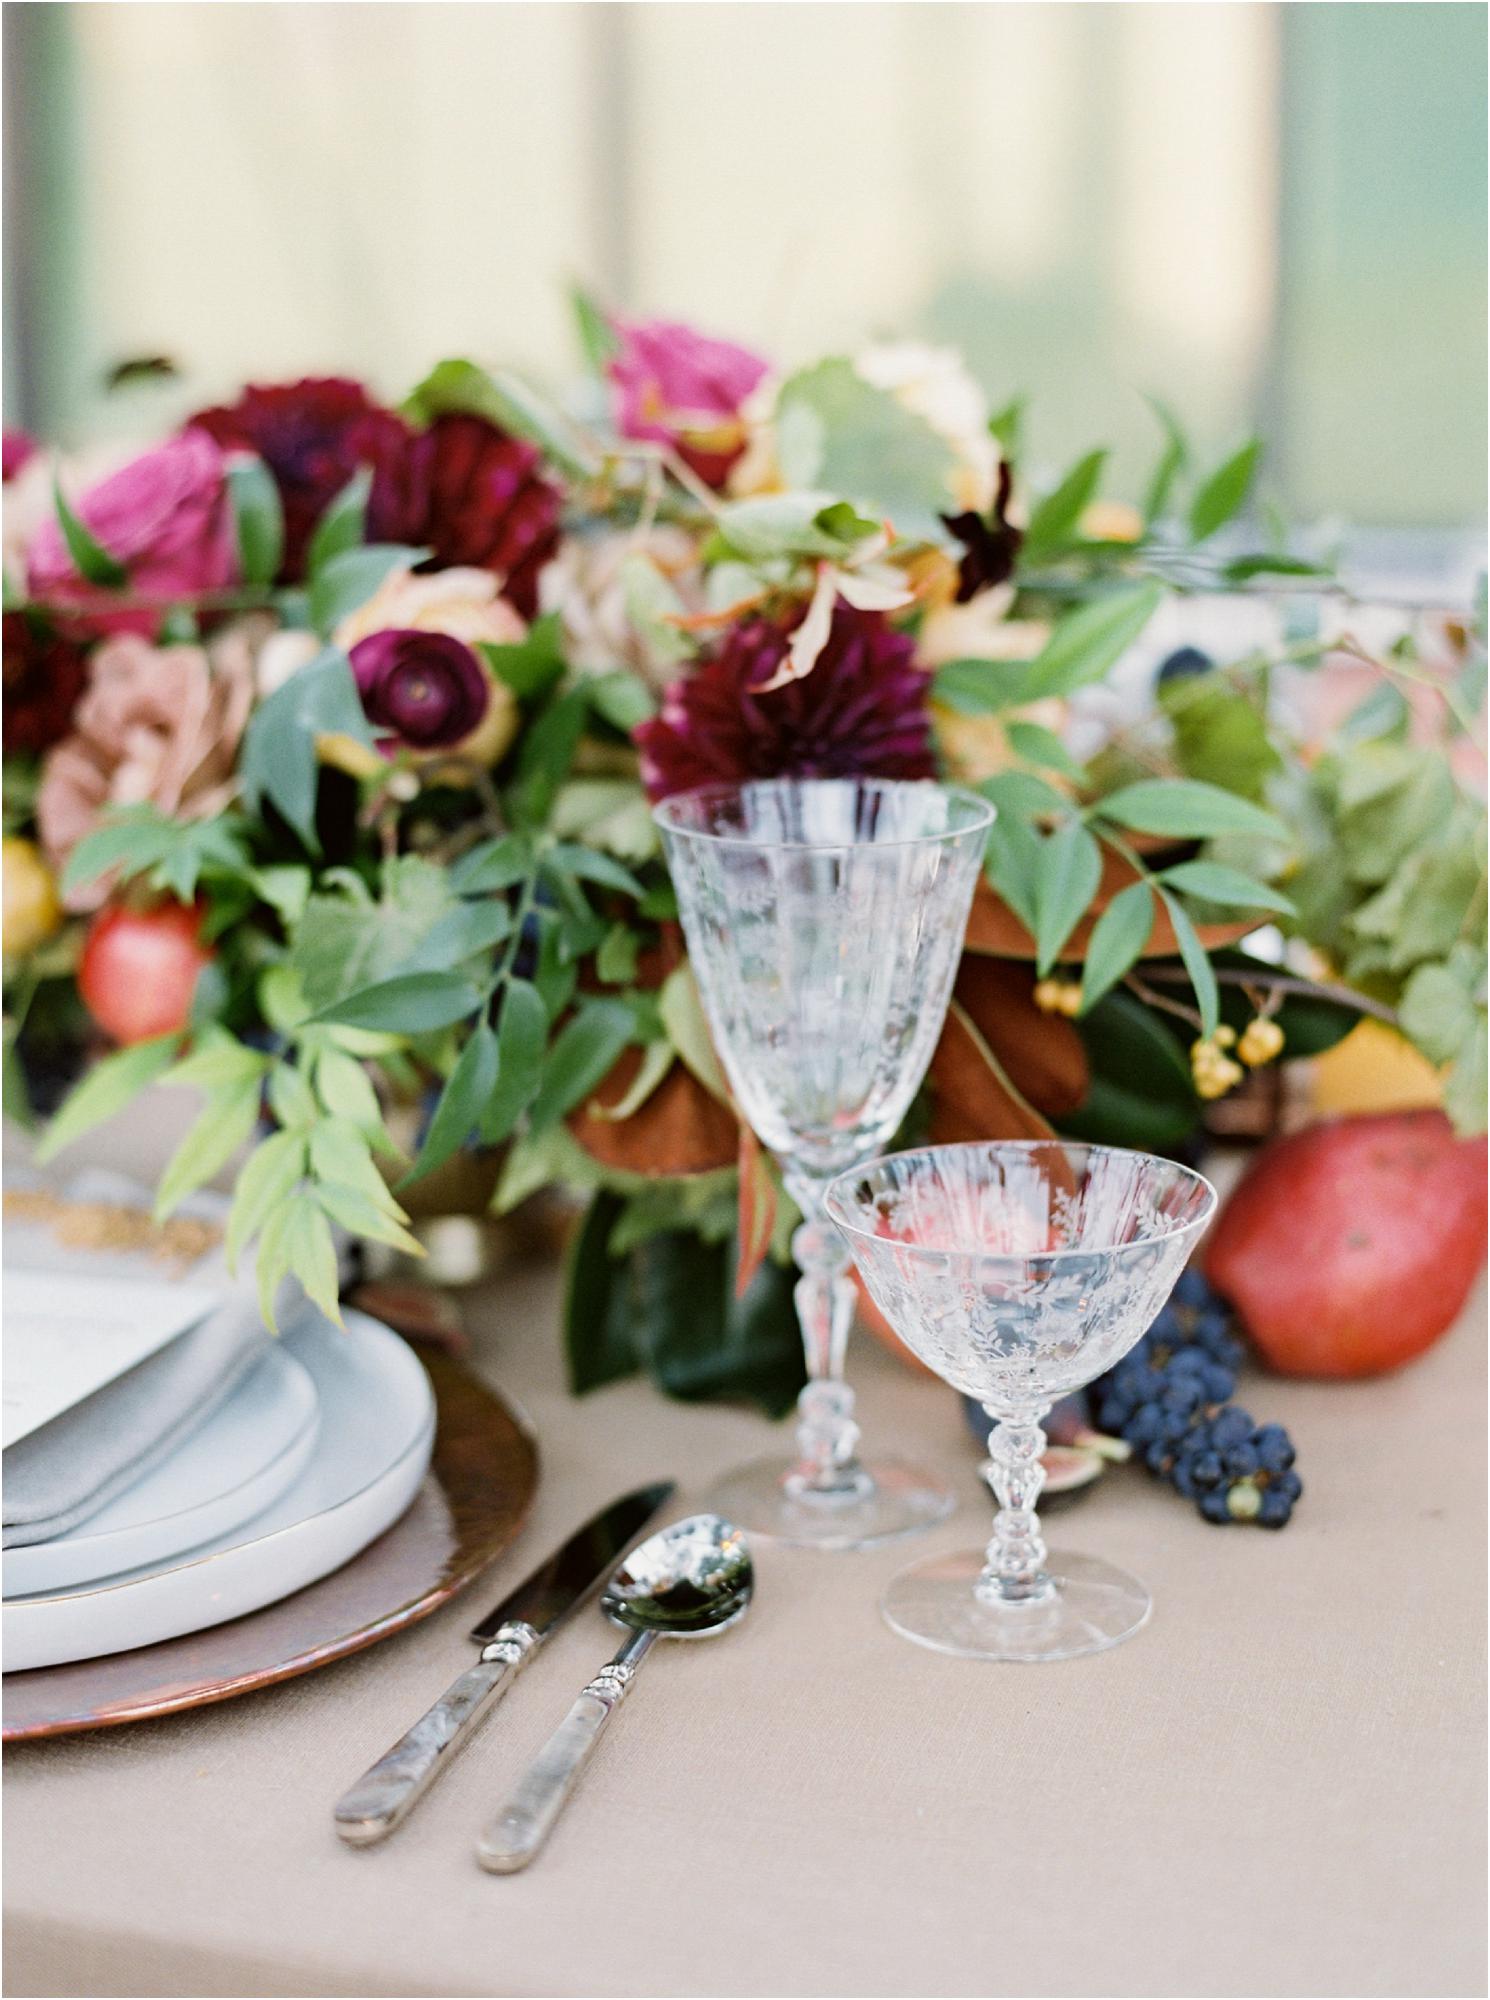 Flathead Lake Wedding Inspiration with Goldfinch Events and Design http://goldfinchevents.com Mum's Flowers http://mumsflowers.net